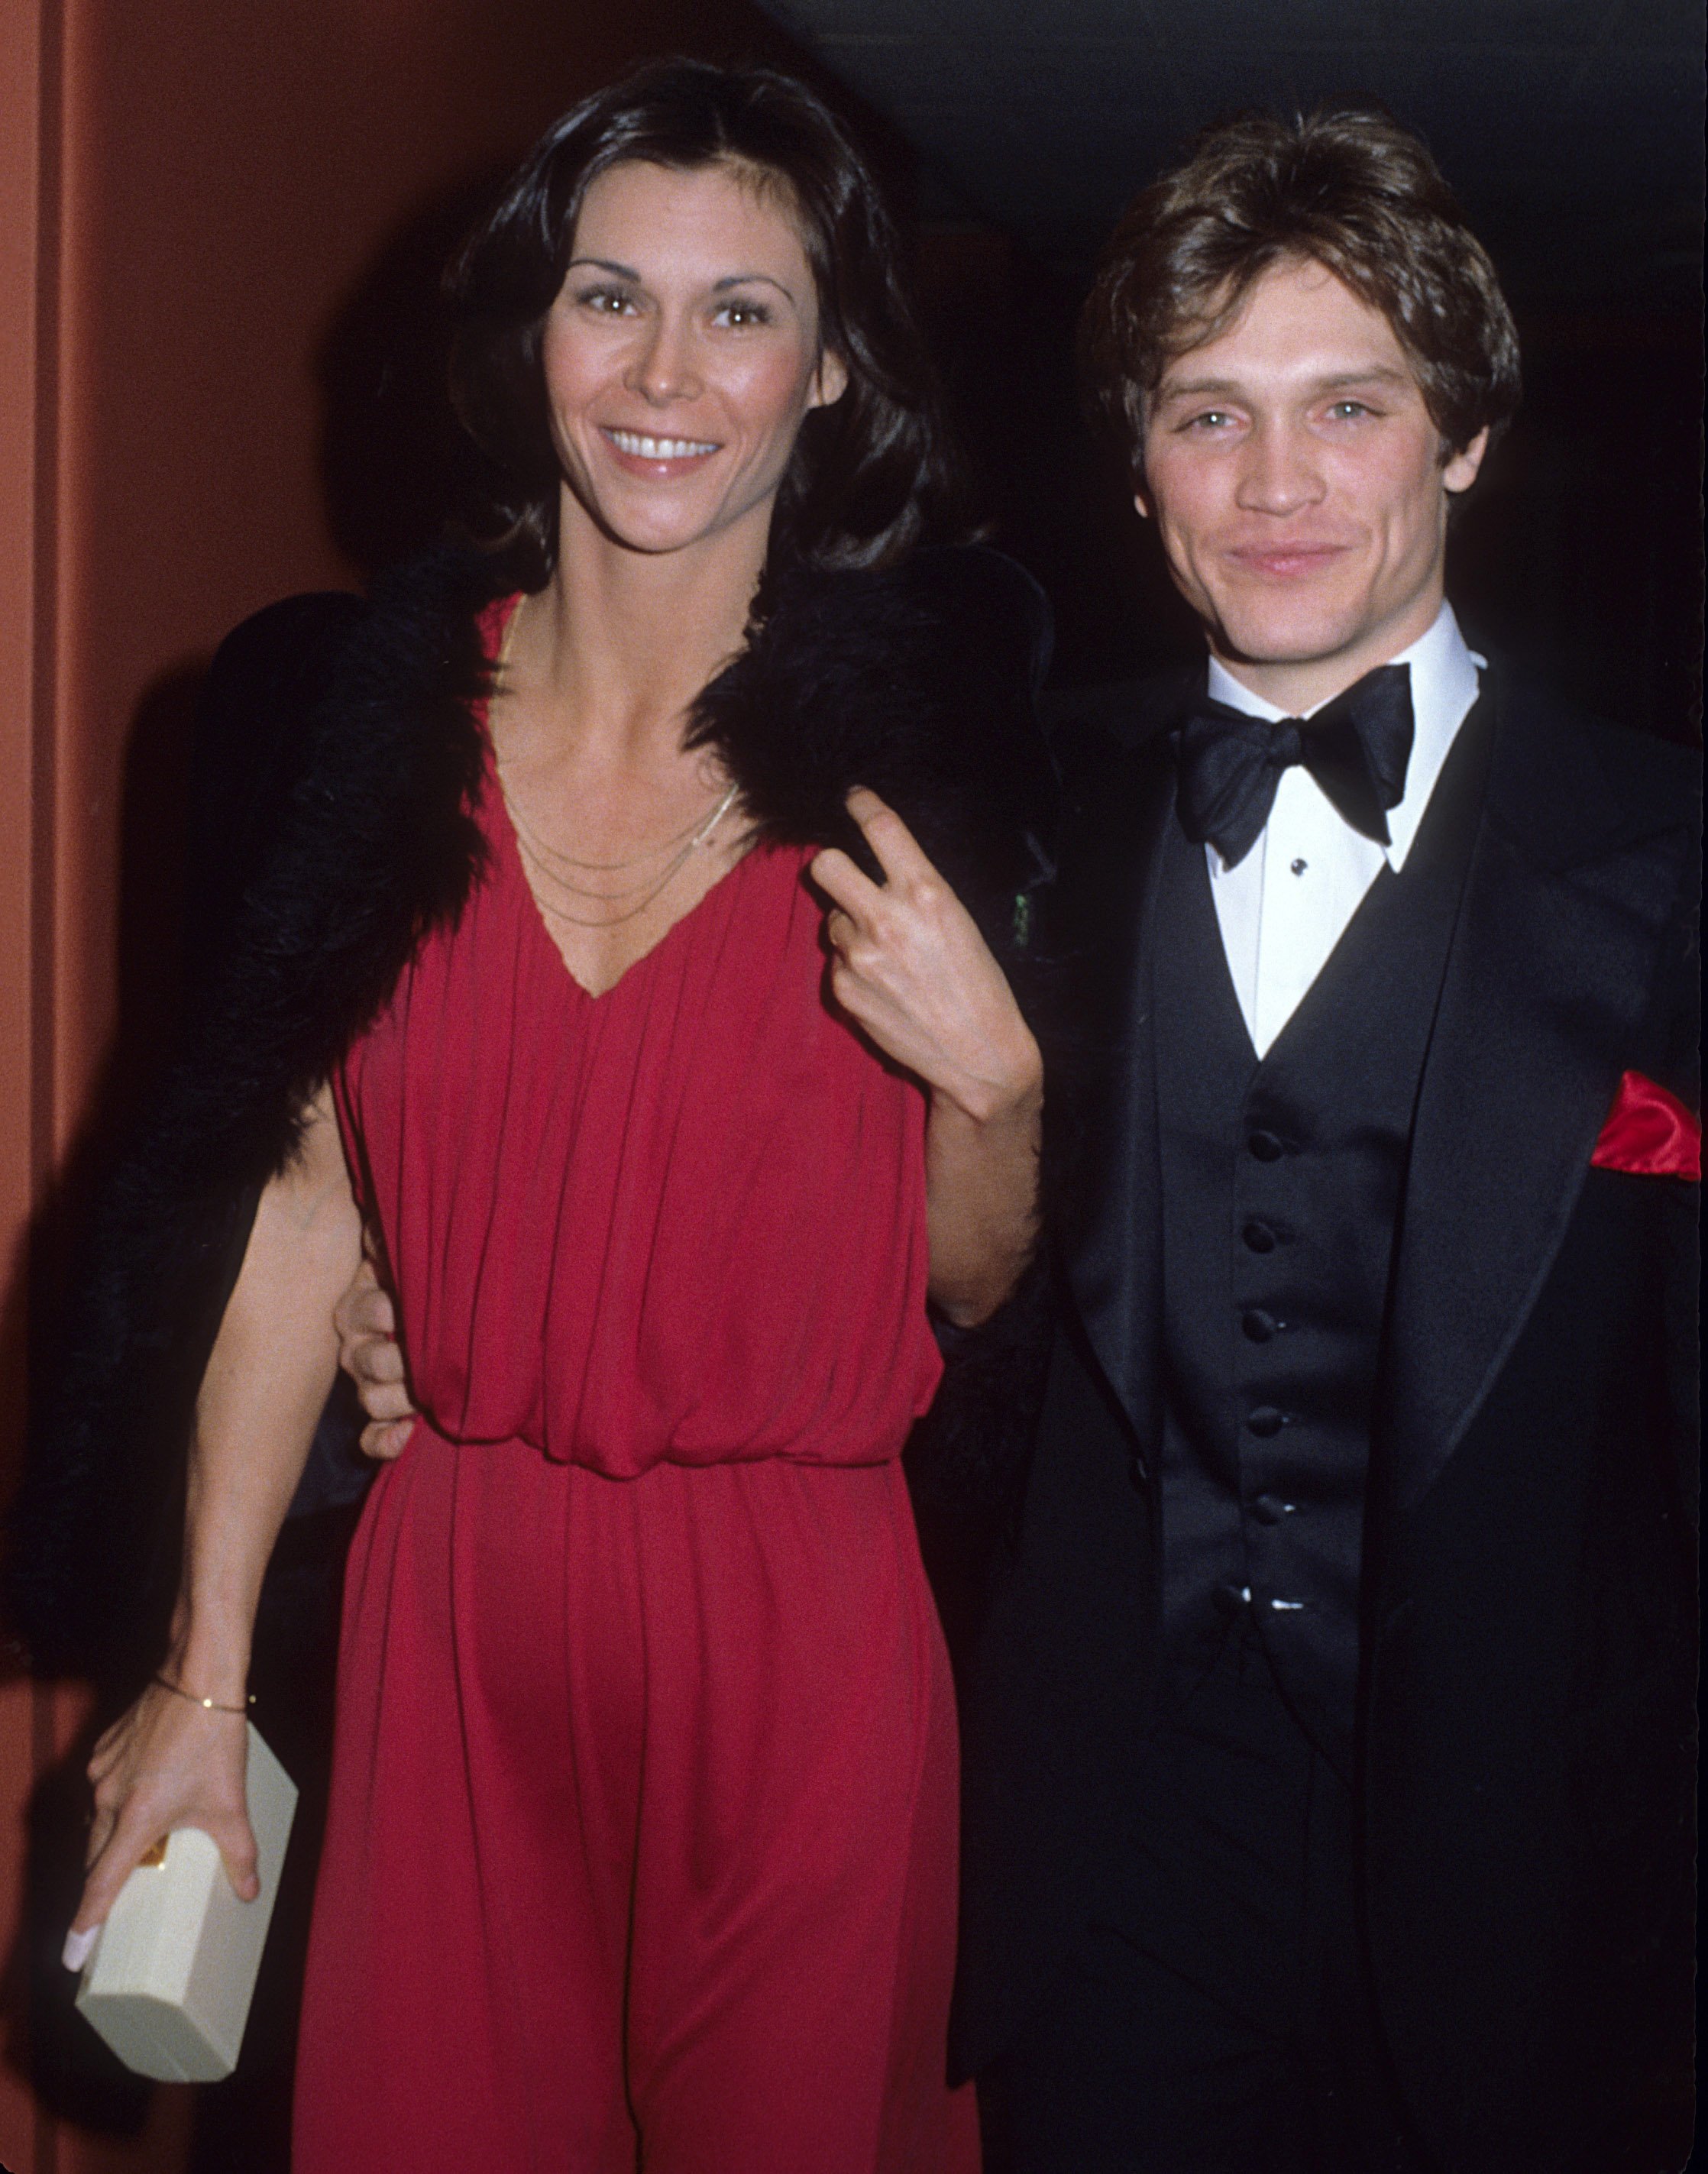 Kate Jackson and Andrew Stevens at the 36th Annual Golden Globe Awards on January 23, 1979 | Source: Getty Images